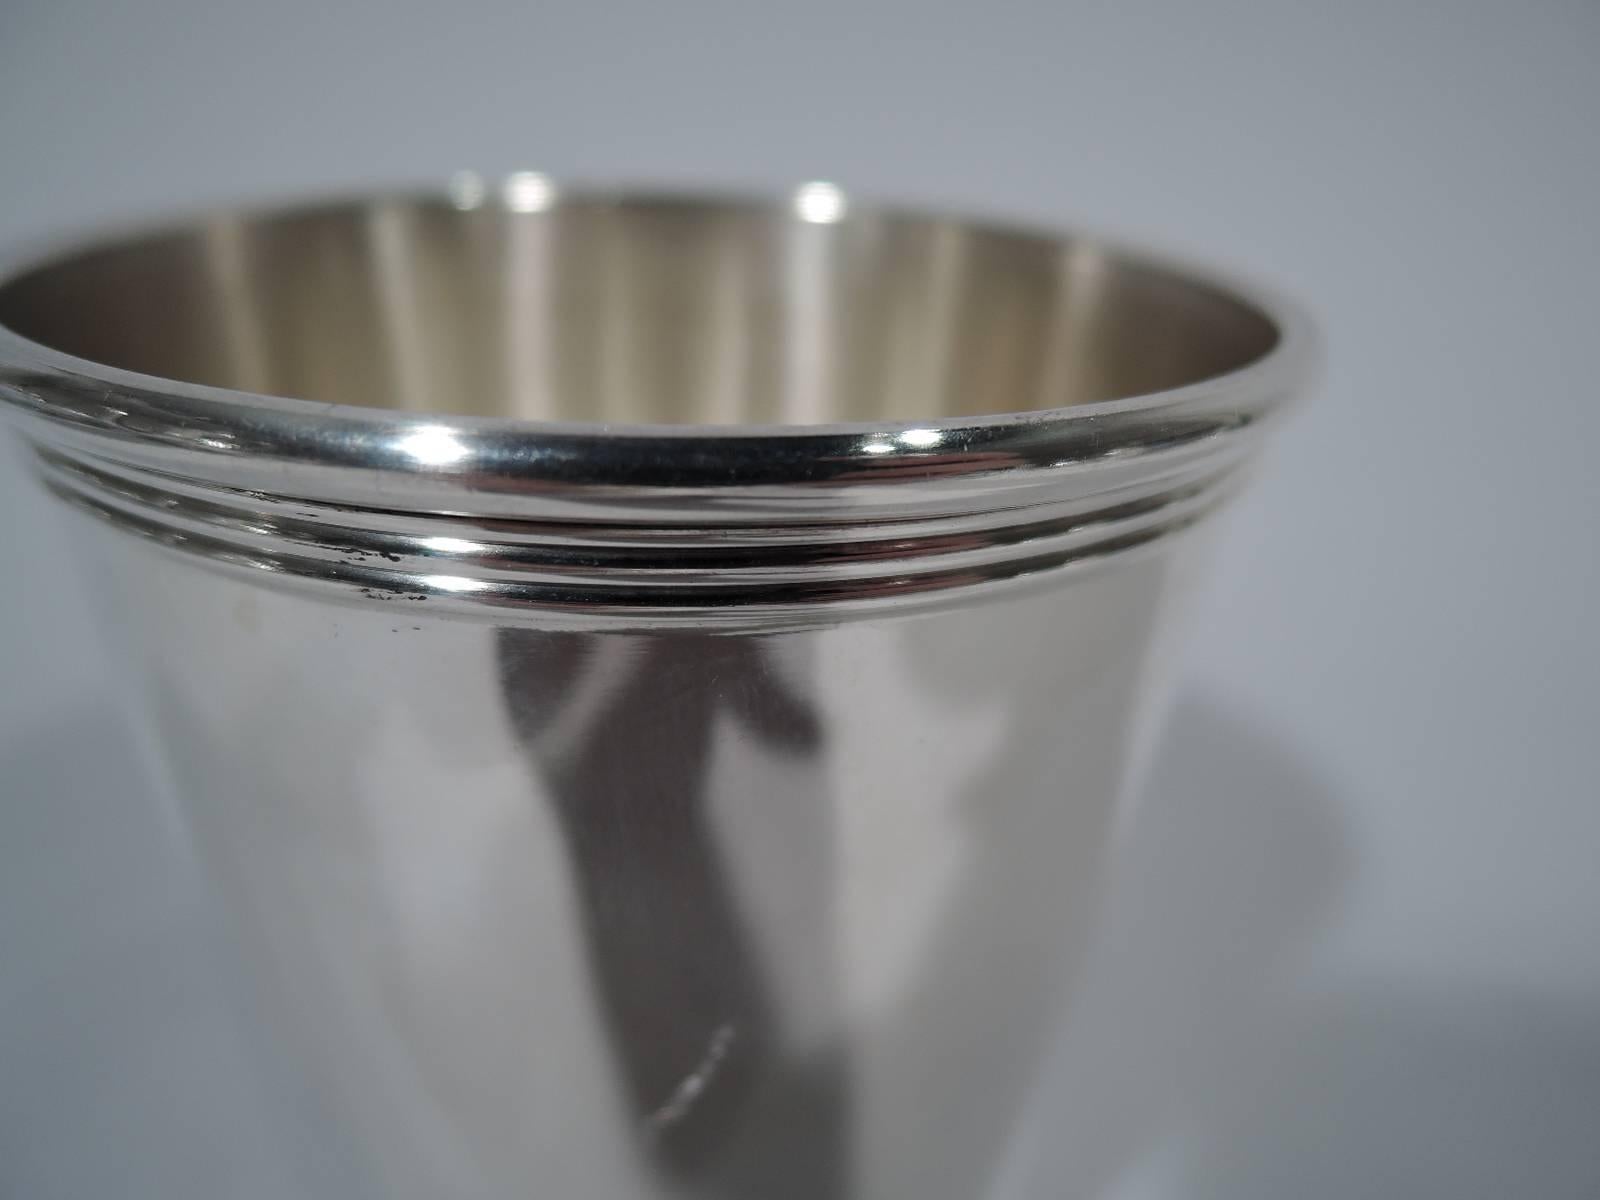 American sterling silver mint julep cup. Straight and tapering sides with reeded rim and base. Hallmarked Newport, a Gorham trademark. Hallmark includes pattern no. 1673. Weight: 3.6 troy ounces.